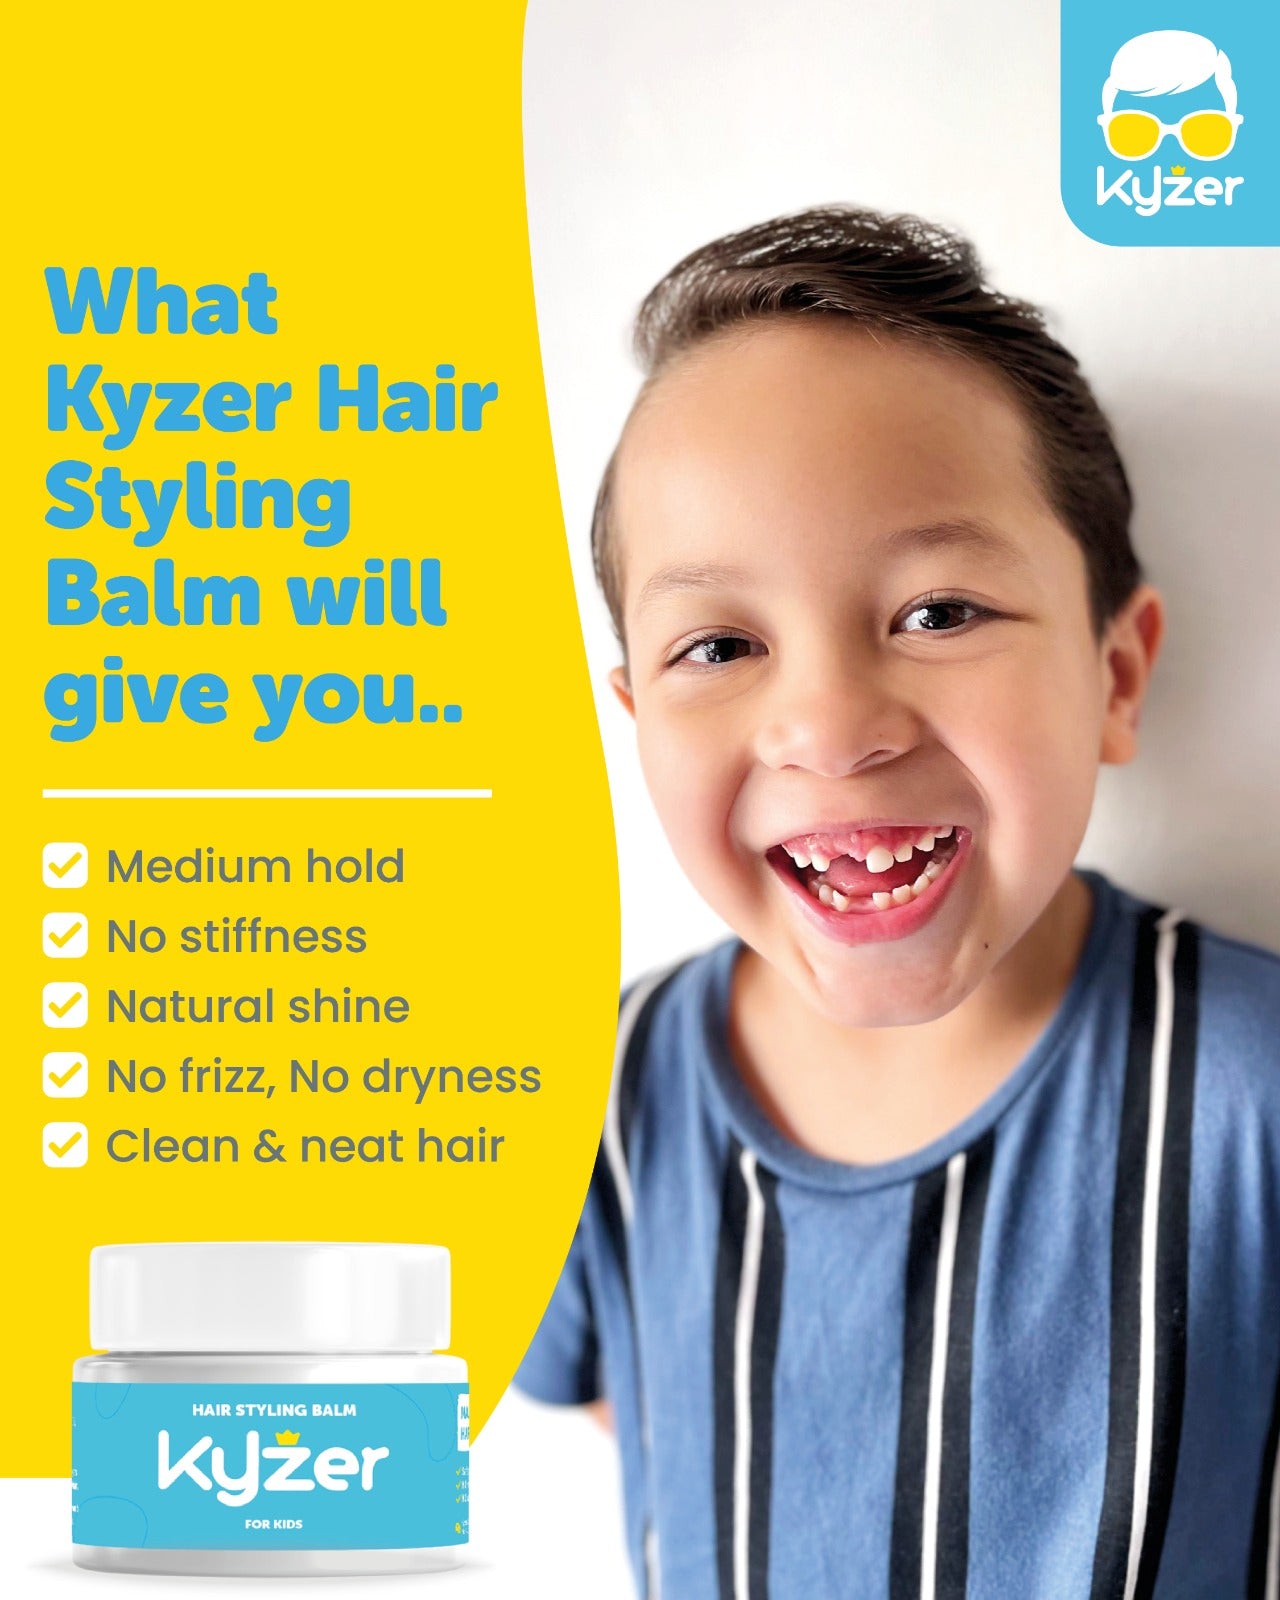 Hair Styling Balm for Kids